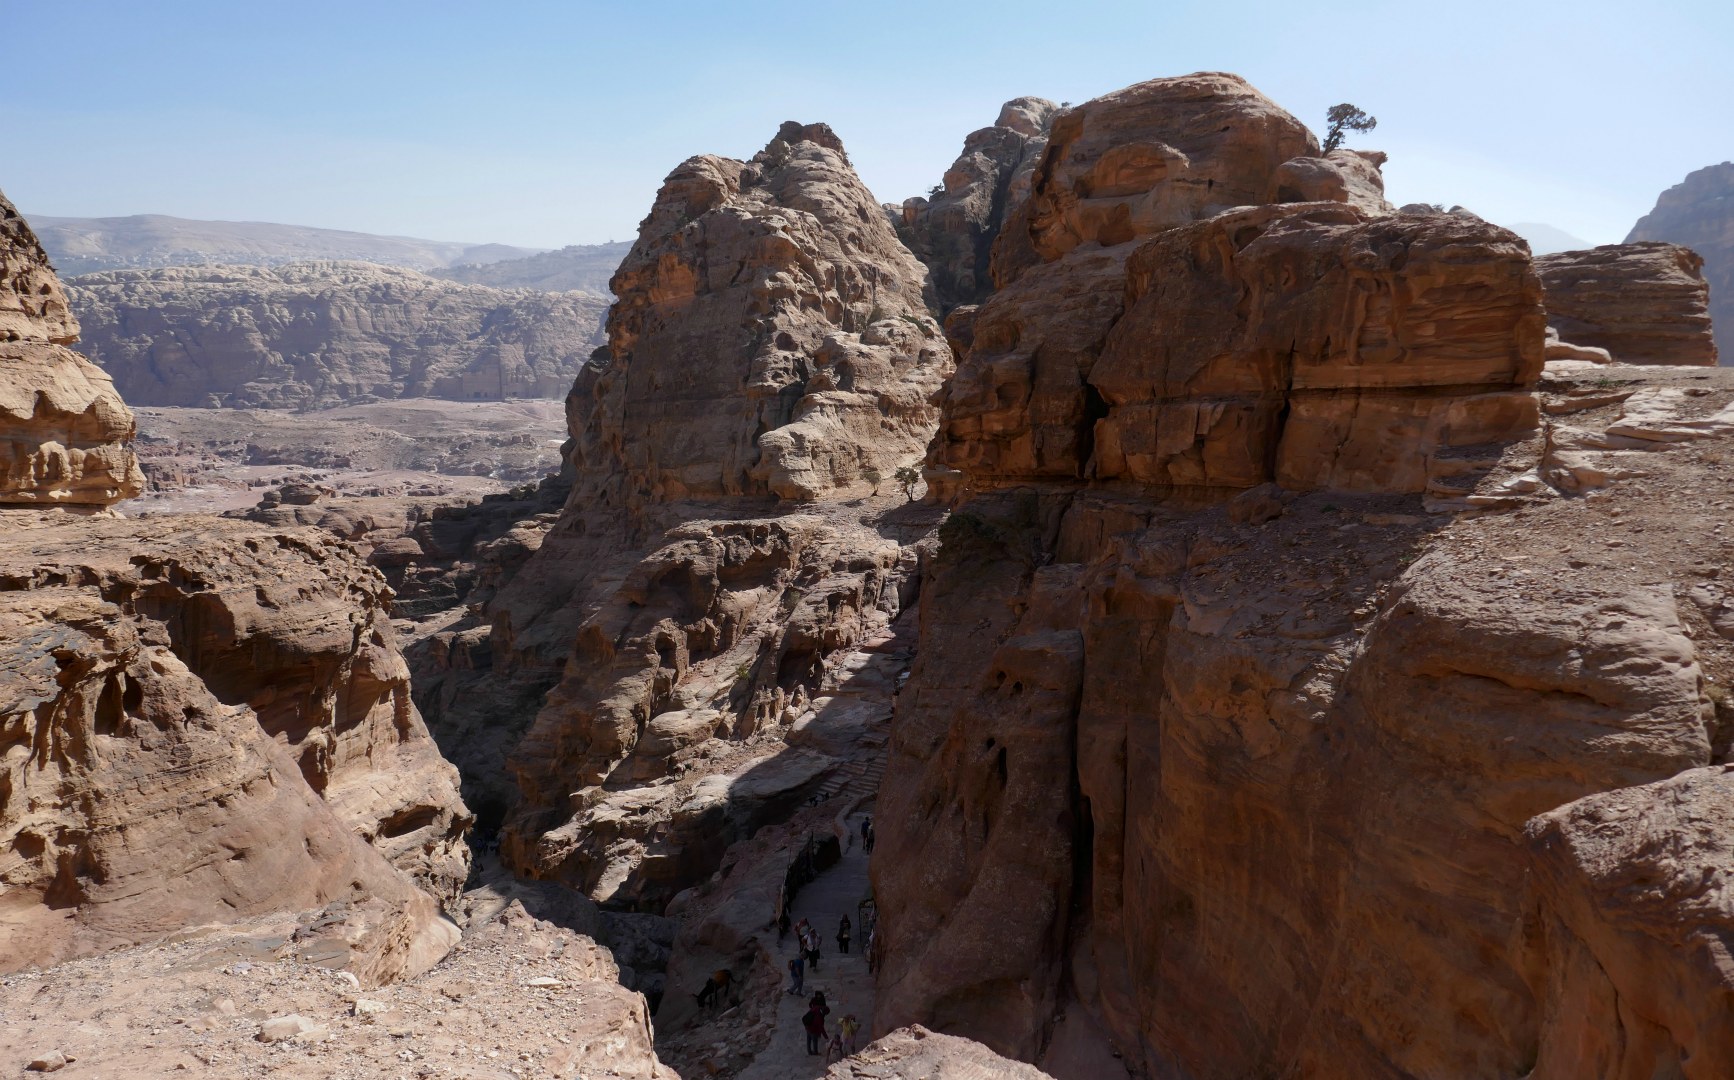 View from path to The Monastery, Petra